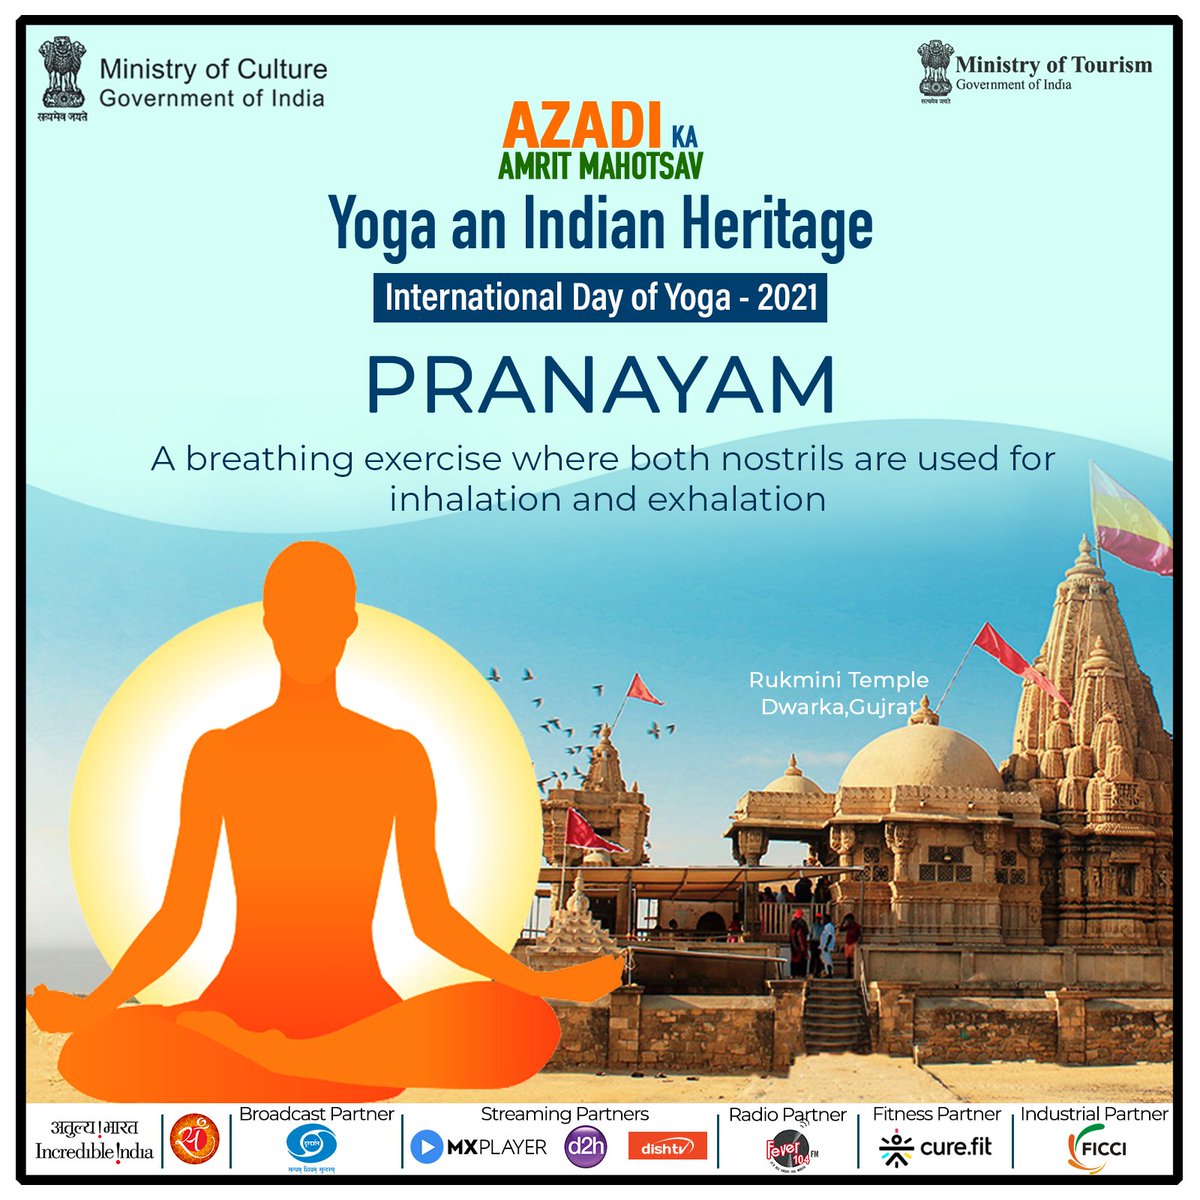 PRANAYAM- Inculcation of #Yoga has increased the domain of India Heritage by leaps and bounds. Pranayama is fundamental type of breathing exercise by using both nostrils for inhalation and exhalation. #YogaAnIndianHeritage #YogaForWellness